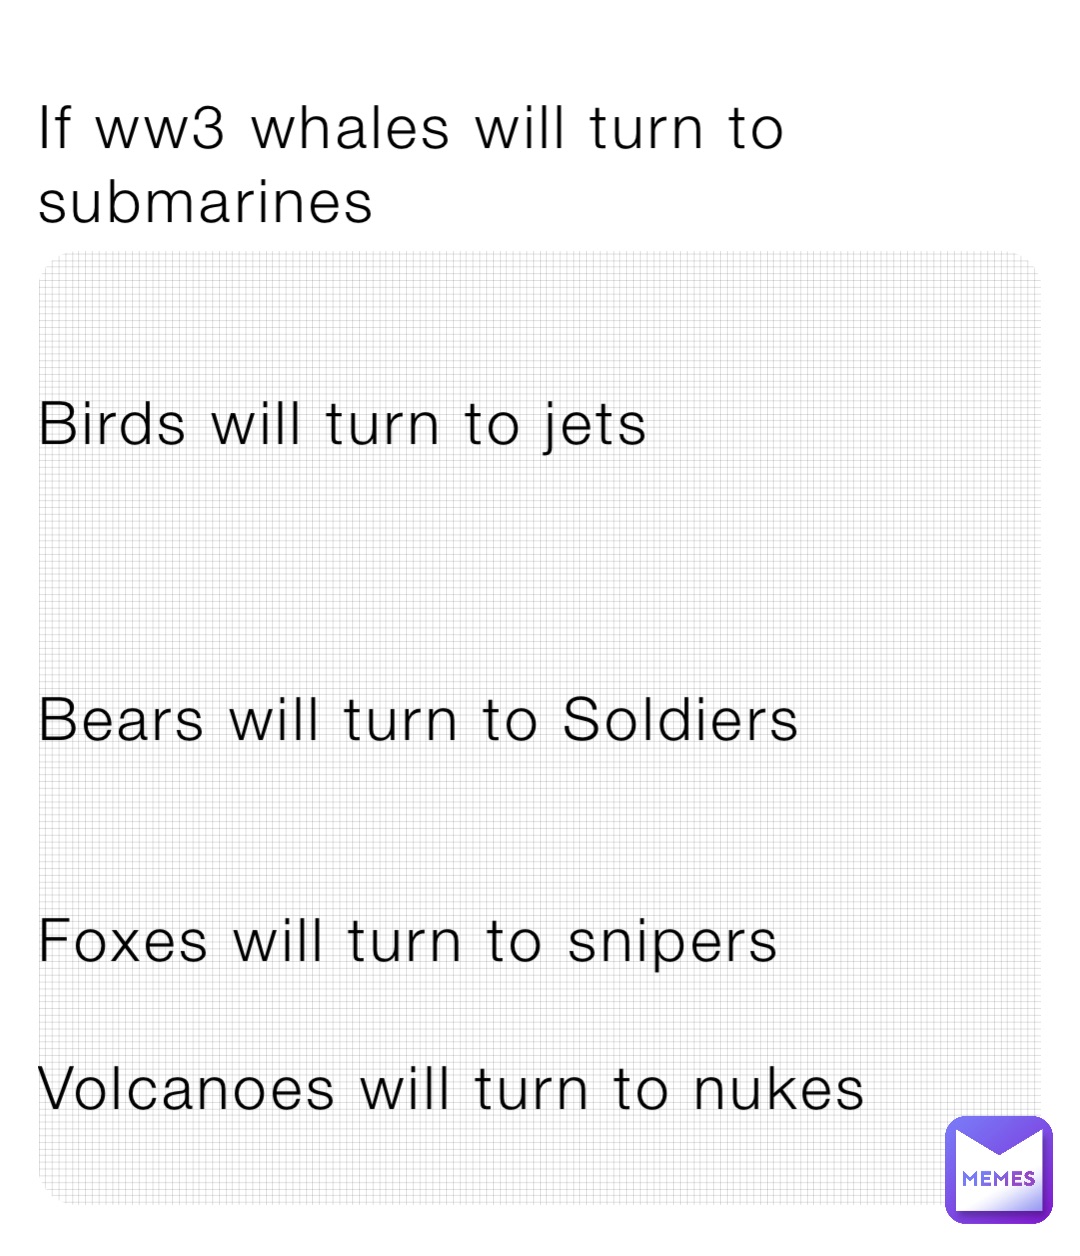 If ww3 whales will turn to submarines 


Birds will turn to jets 



Bears will turn to Soldiers 


Foxes will turn to snipers 

Volcanoes will turn to nukes